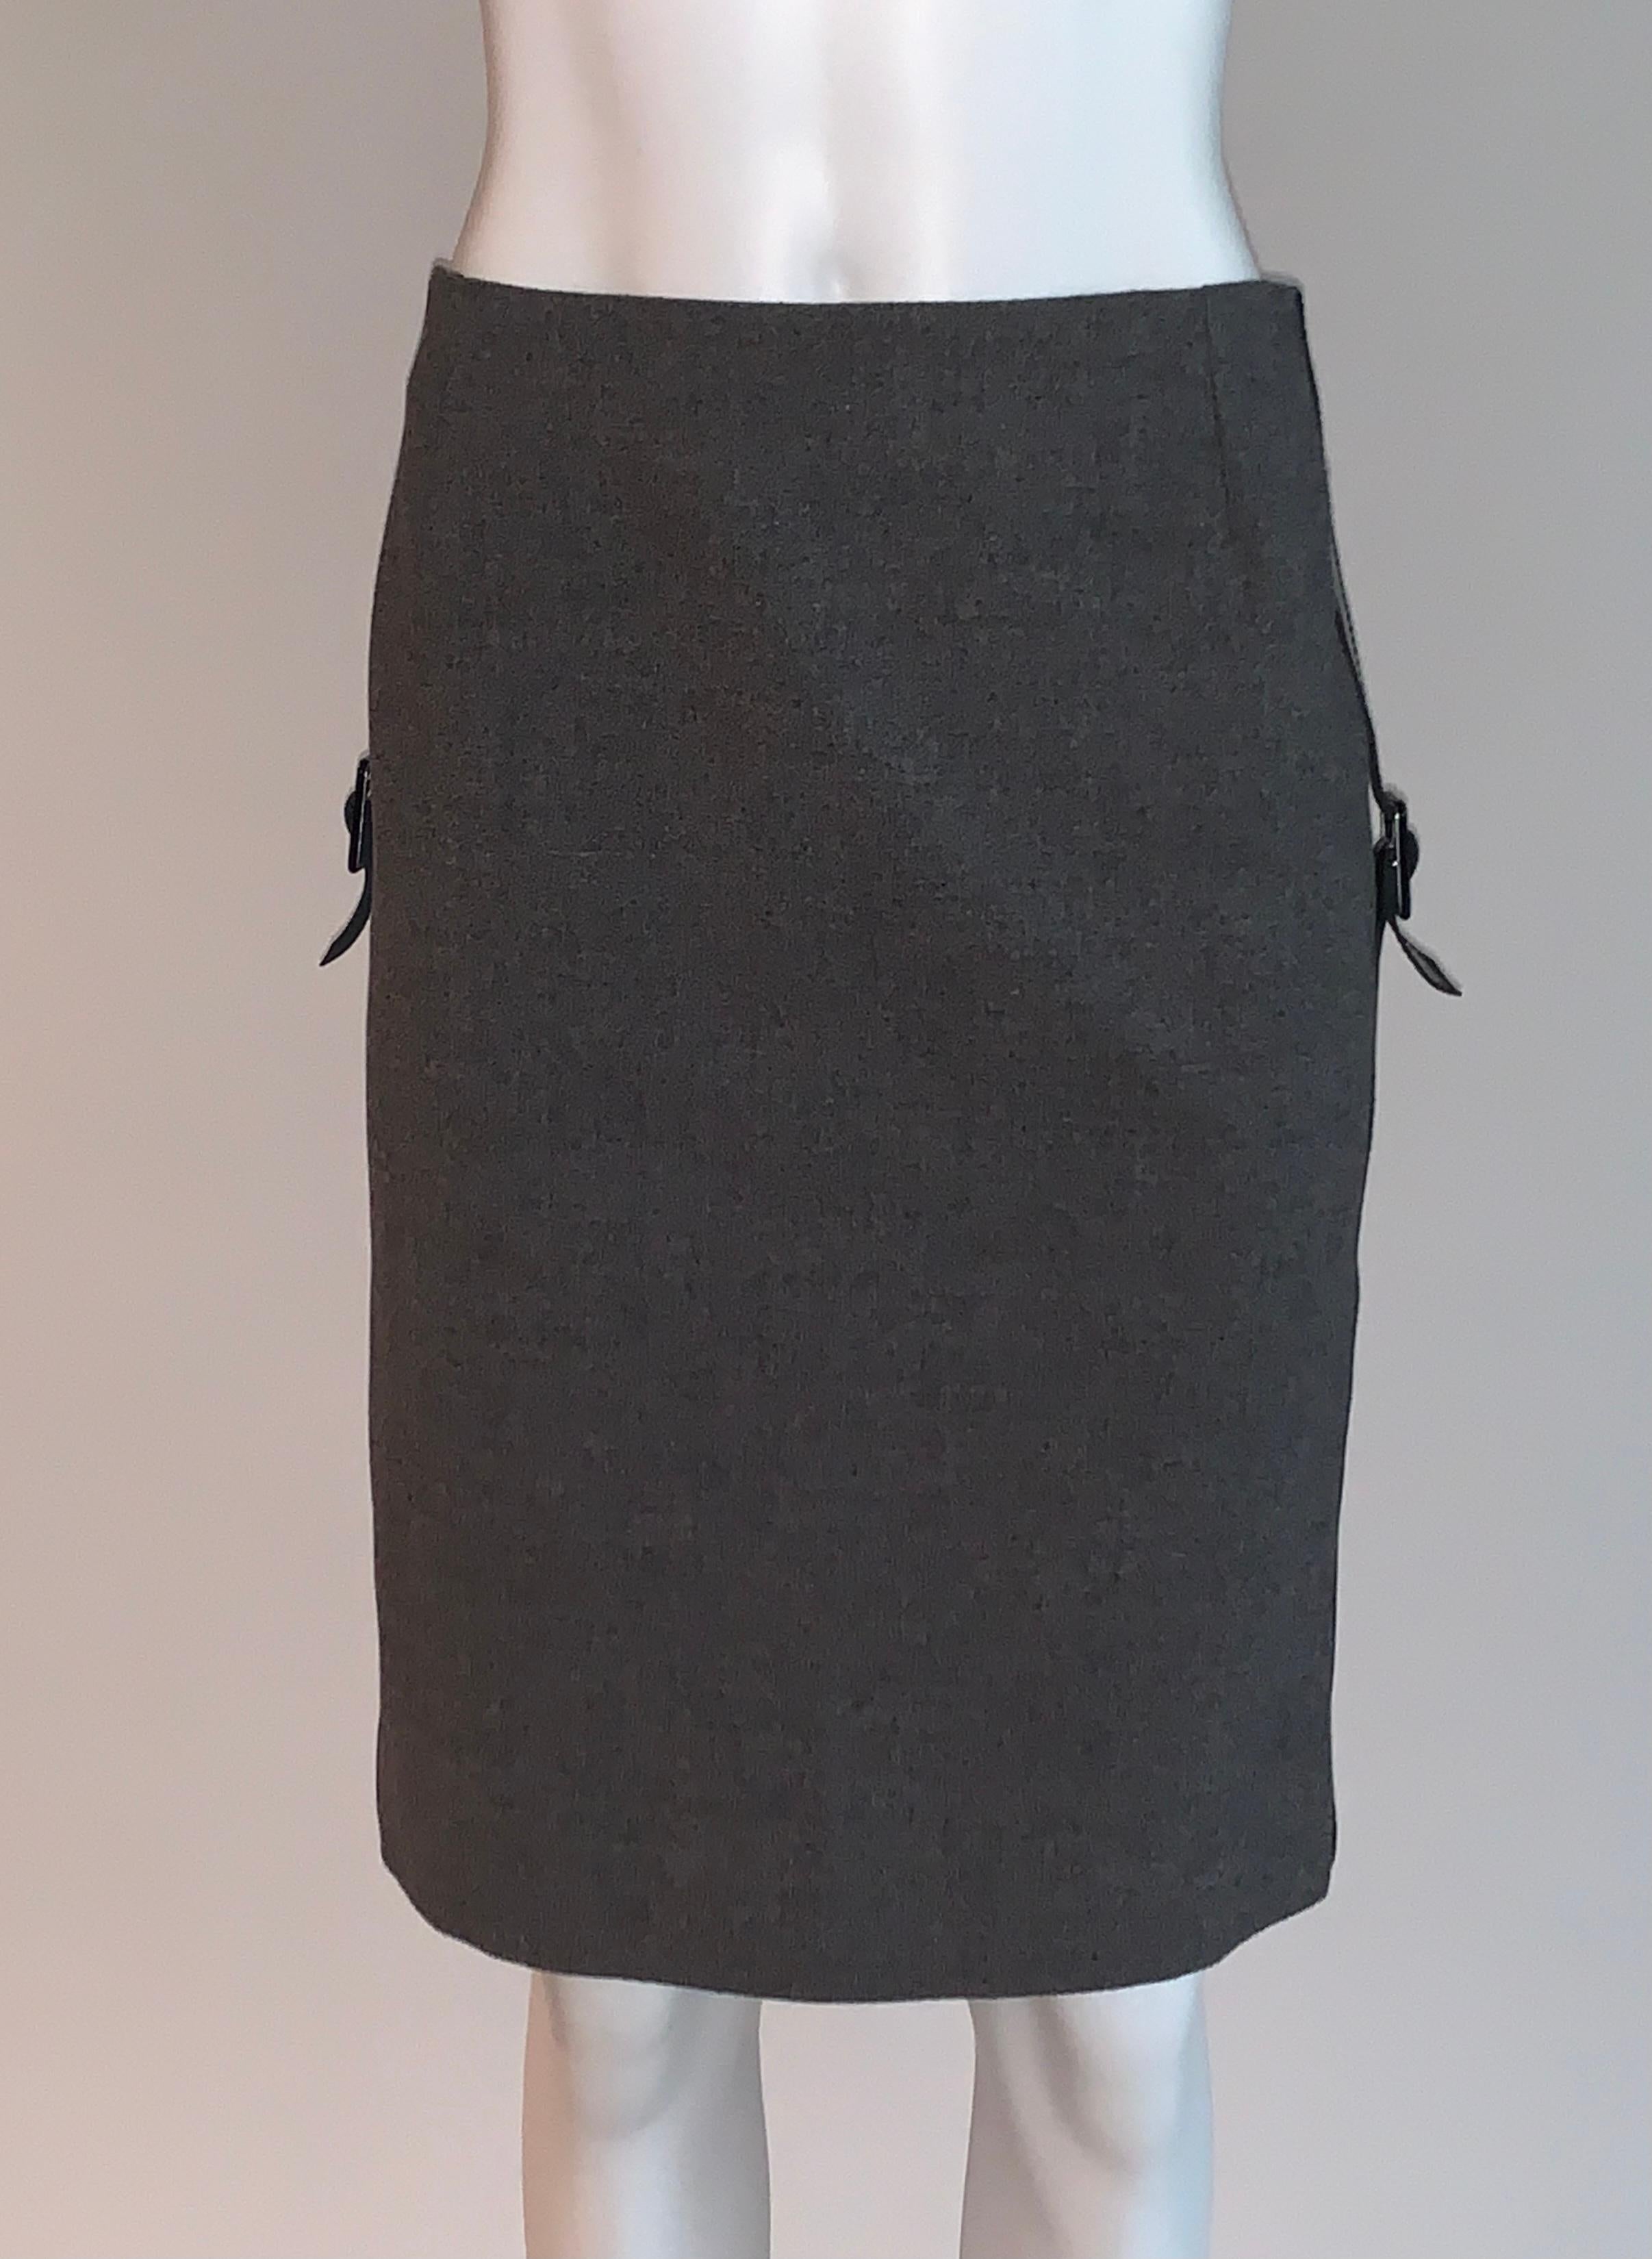 Alexander McQueen grey pencil skirt with black patent leather accent strips at side that fasten just below hip with a patent buckle. Back zip and hook and eye.

96% virgin wool, 4% leather.
Fully lined in 57% viscose, 43% polyester.

Made in